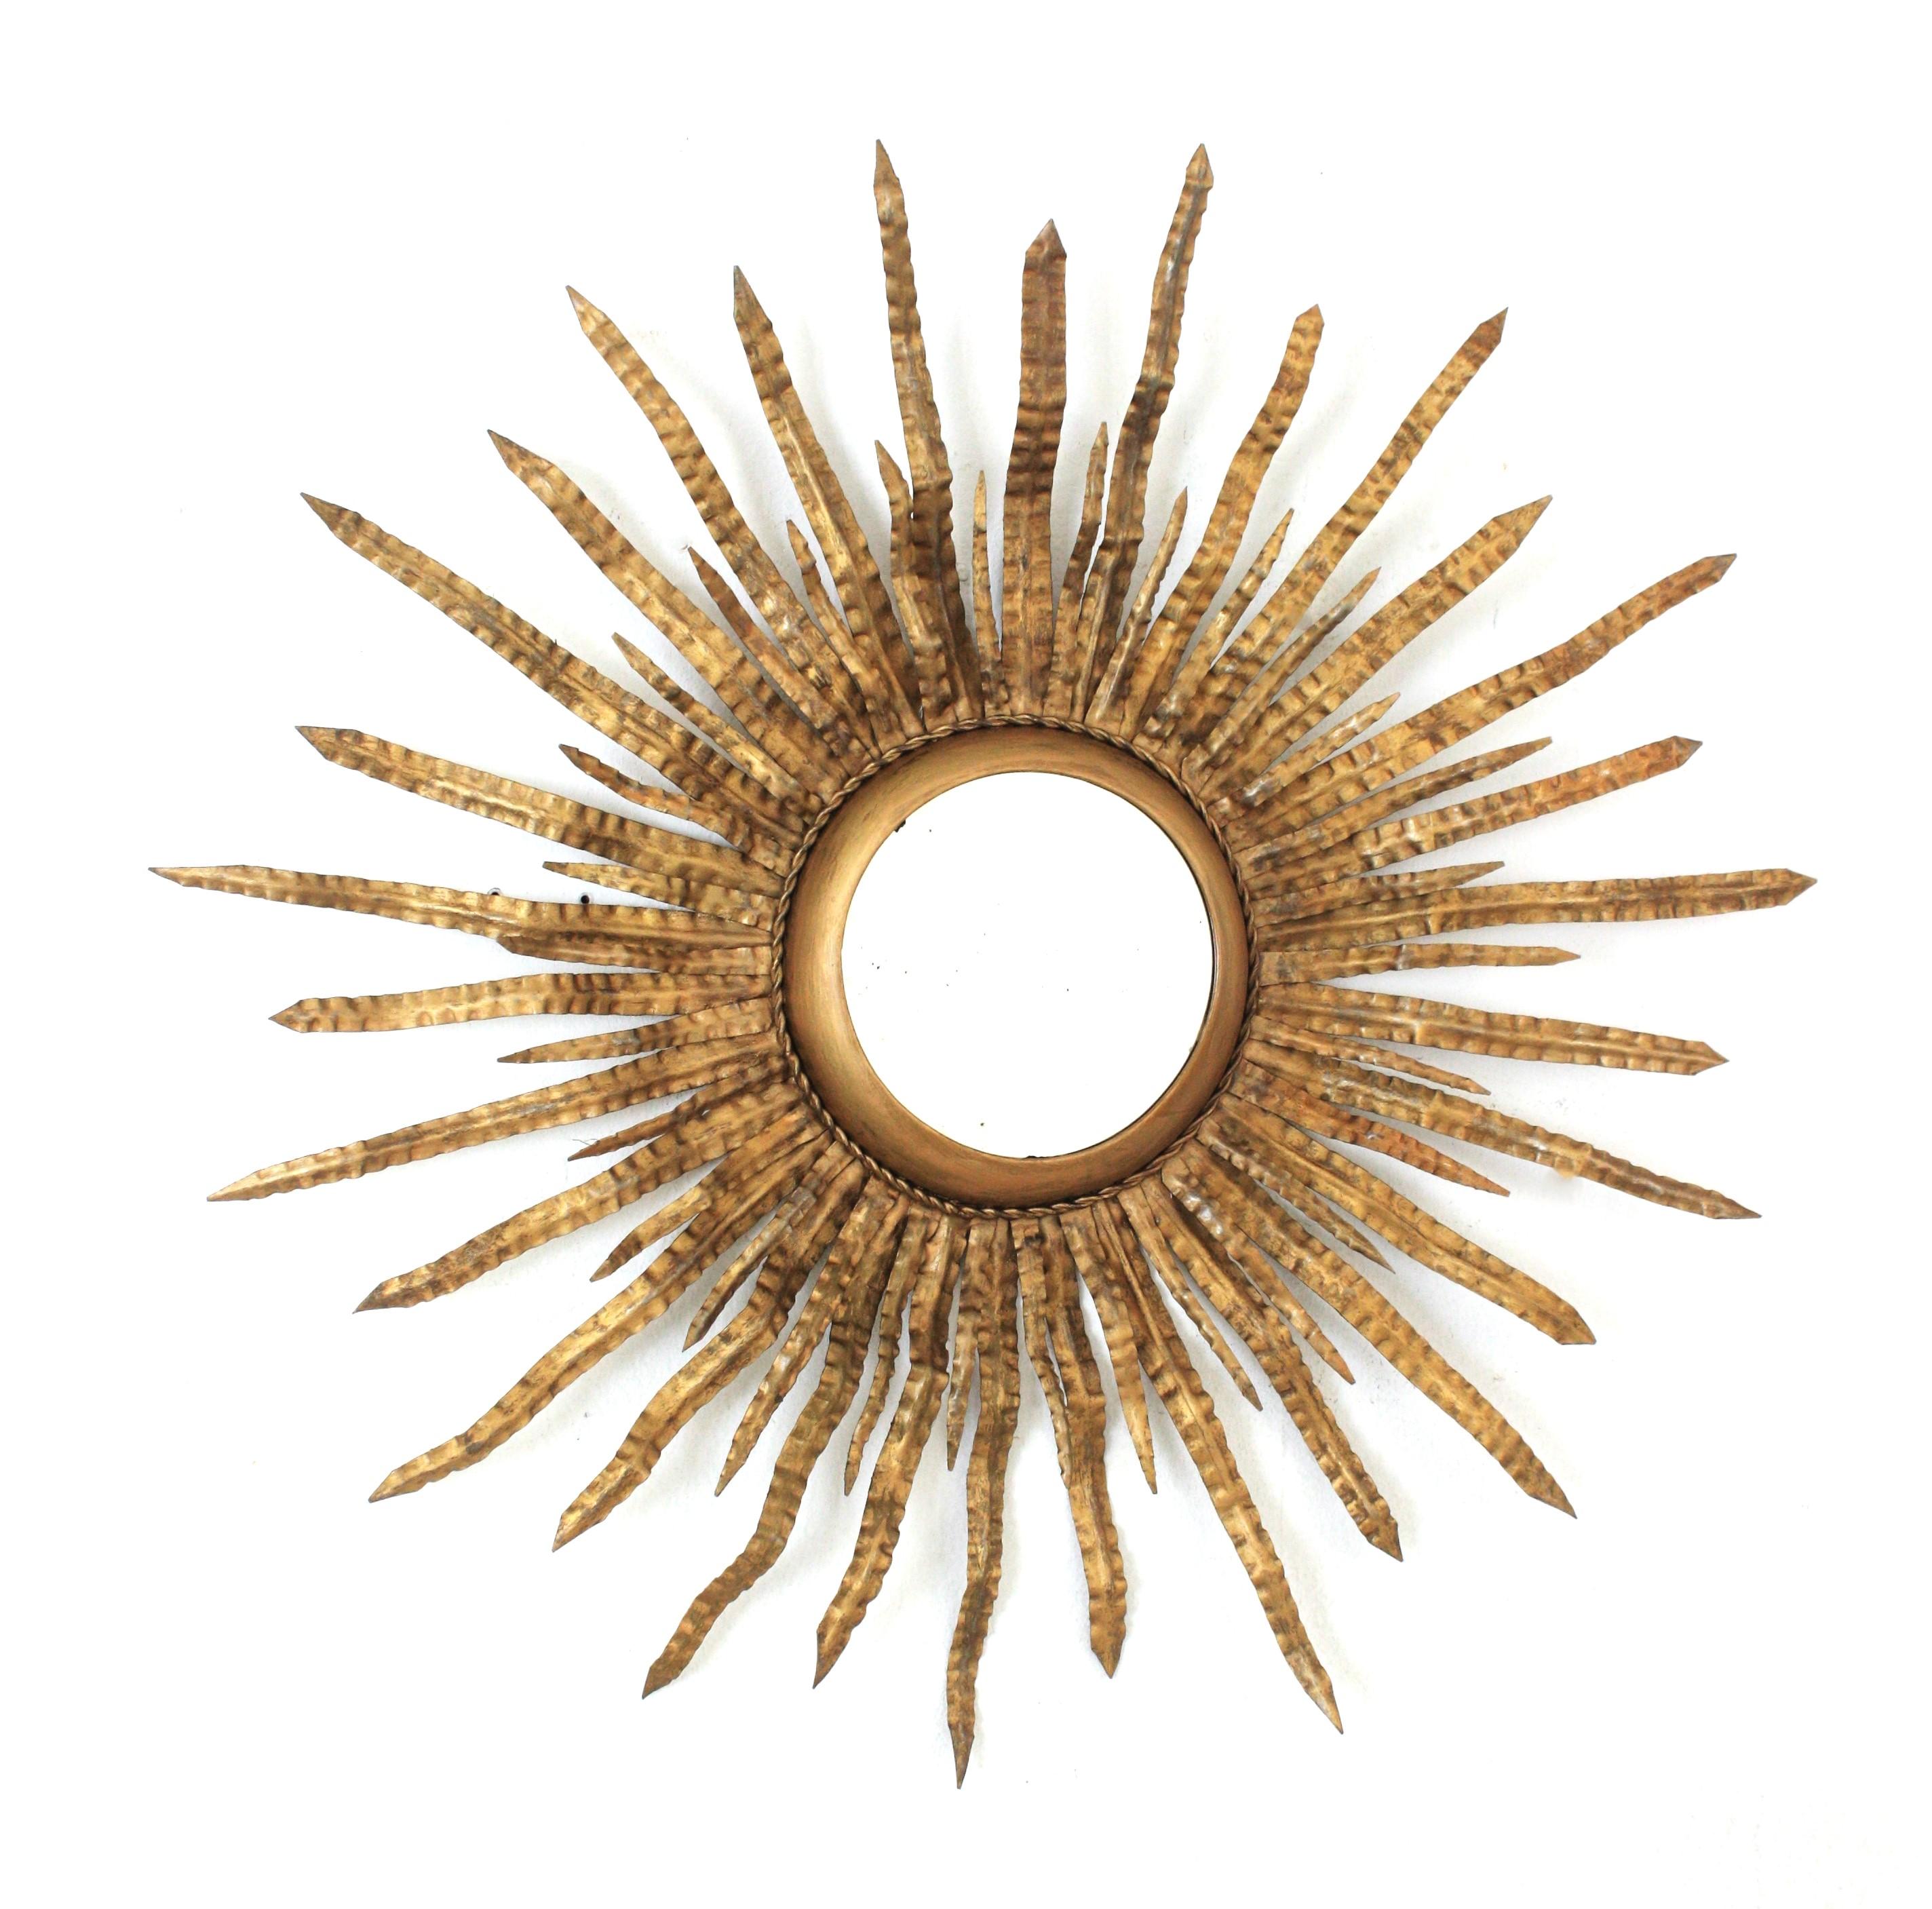 Large Sunburst Starburst Mirror, Gilt Metal
Mid-Century Modern double layered sunburst wall mirror, Spain, 1960s
This eye-catching foliage sunburst mirror features a double layer of thin leaves, surrounding a central round glass. The leaves are full